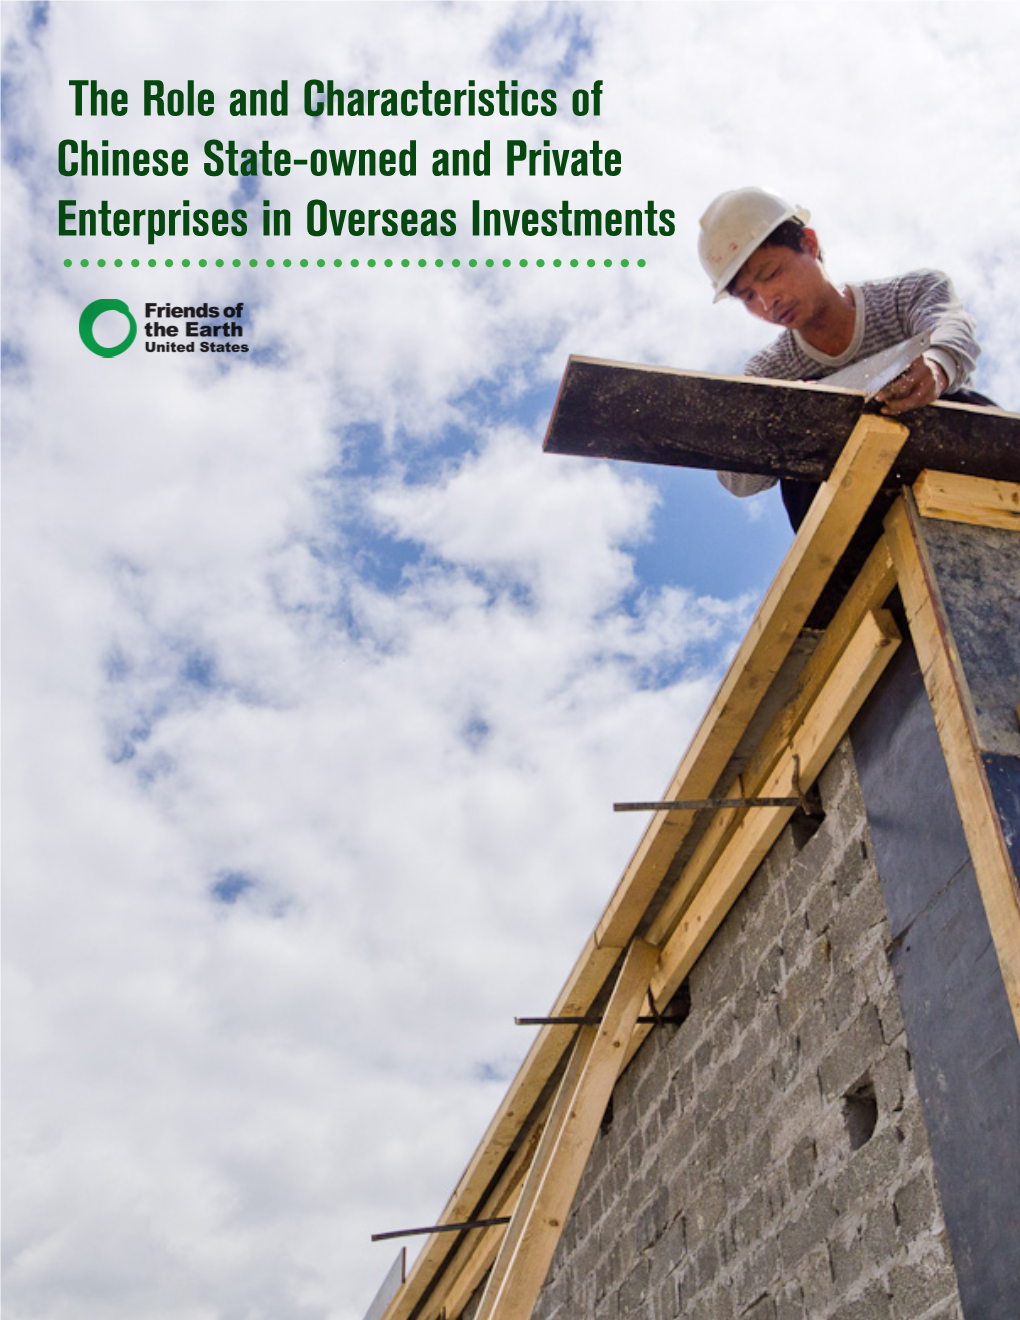 The Role and Characteristics of Chinese State-Owned and Private Enterprises in Overseas Investments